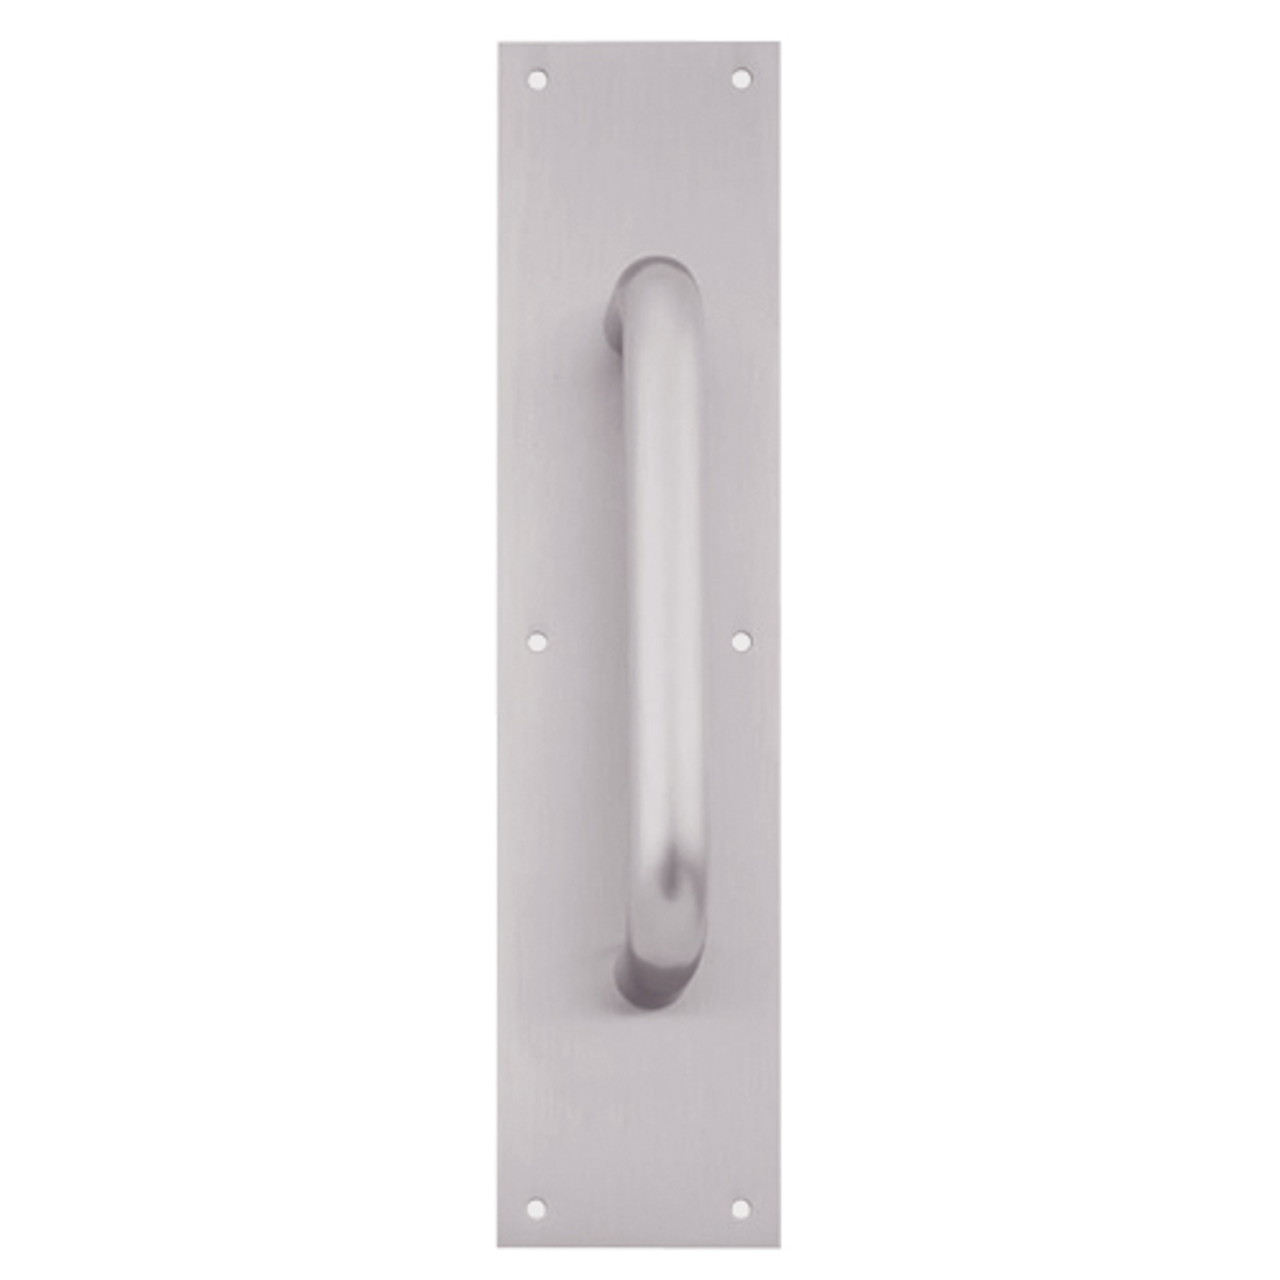 8303-8-US32D-6x16 IVES Architectural Door Trim 6x16 Inch Pull Plate in Satin Stainless Steel